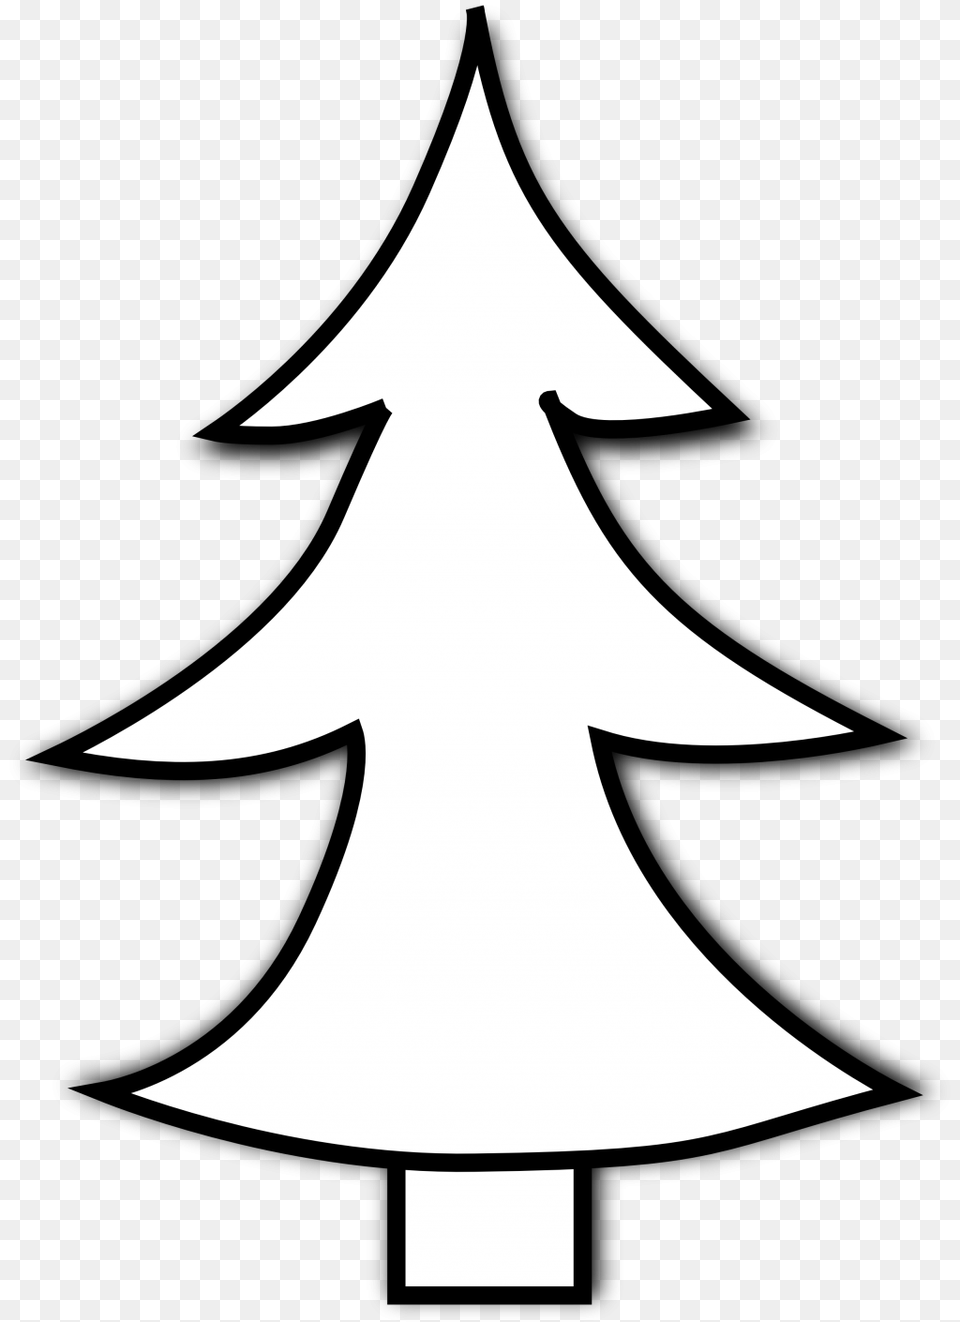 Baby Nursery Exquisite Black And White Christmas Tree Clip Art, Stencil, Silhouette Free Png Download